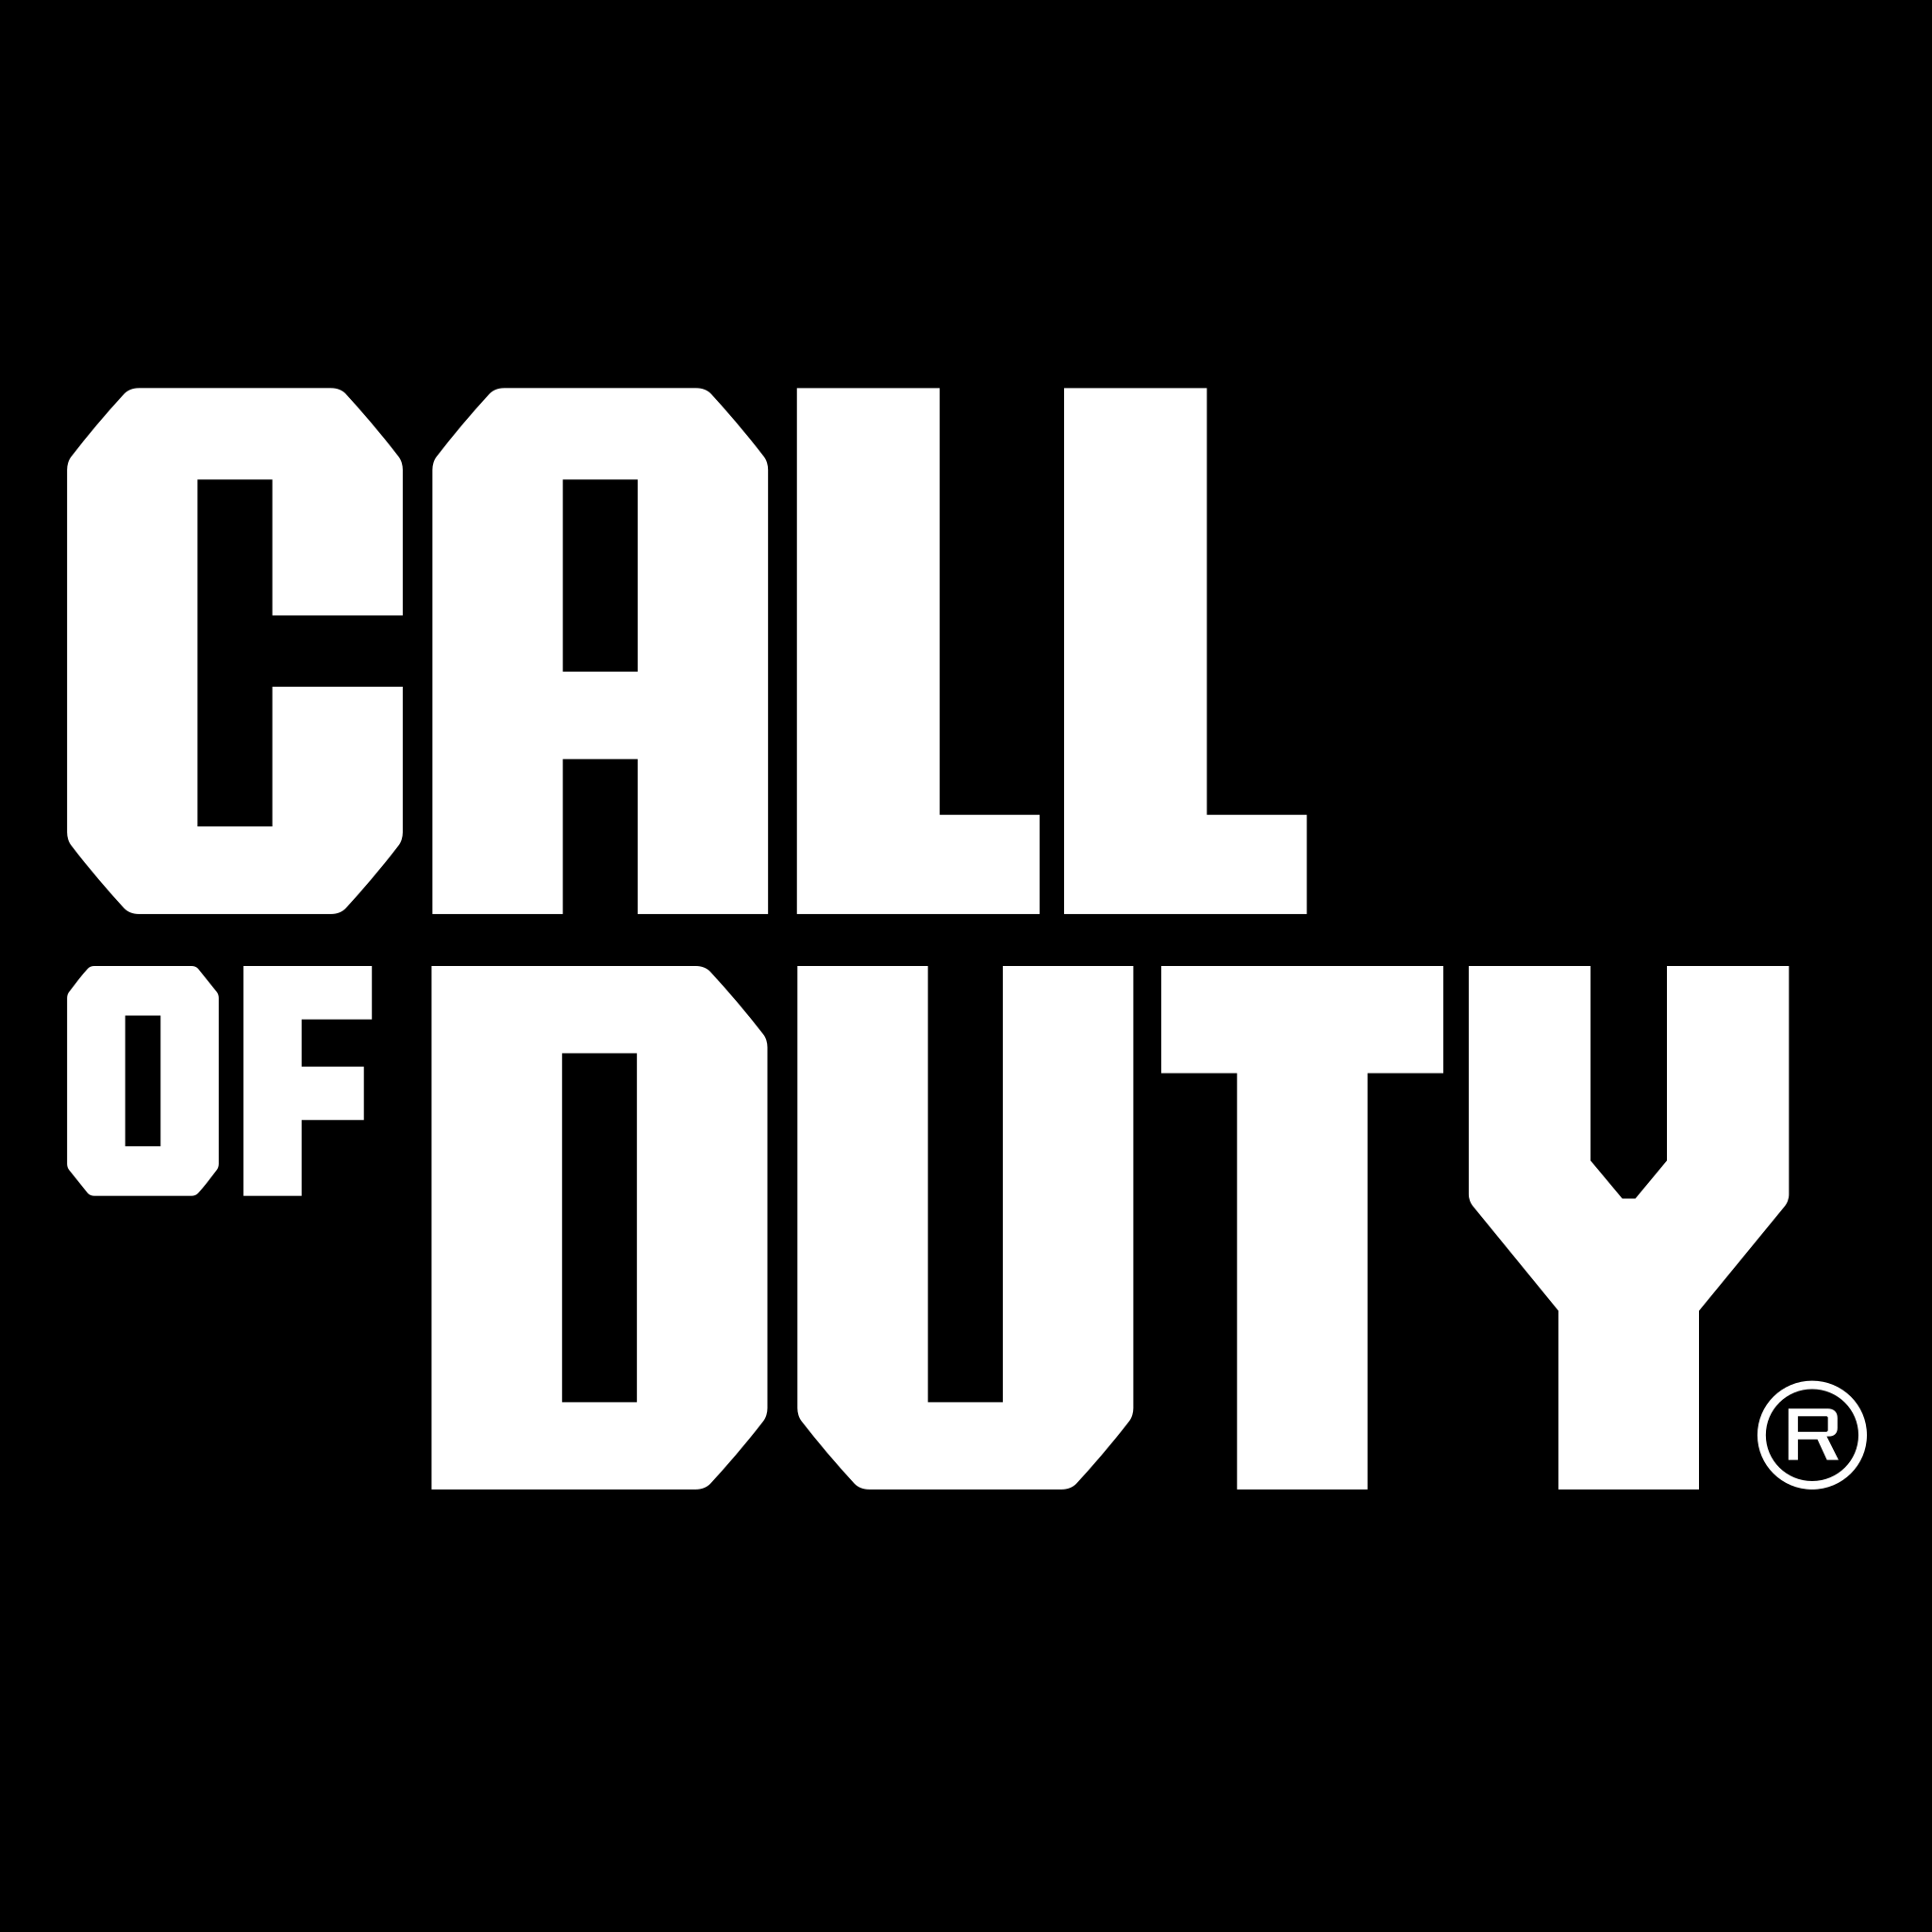 Call of Duty Mobile Logo Yellow Background 4K Ultra HD Mobile Wallpaper | Call  of duty, Mobile logo, Call of duty black